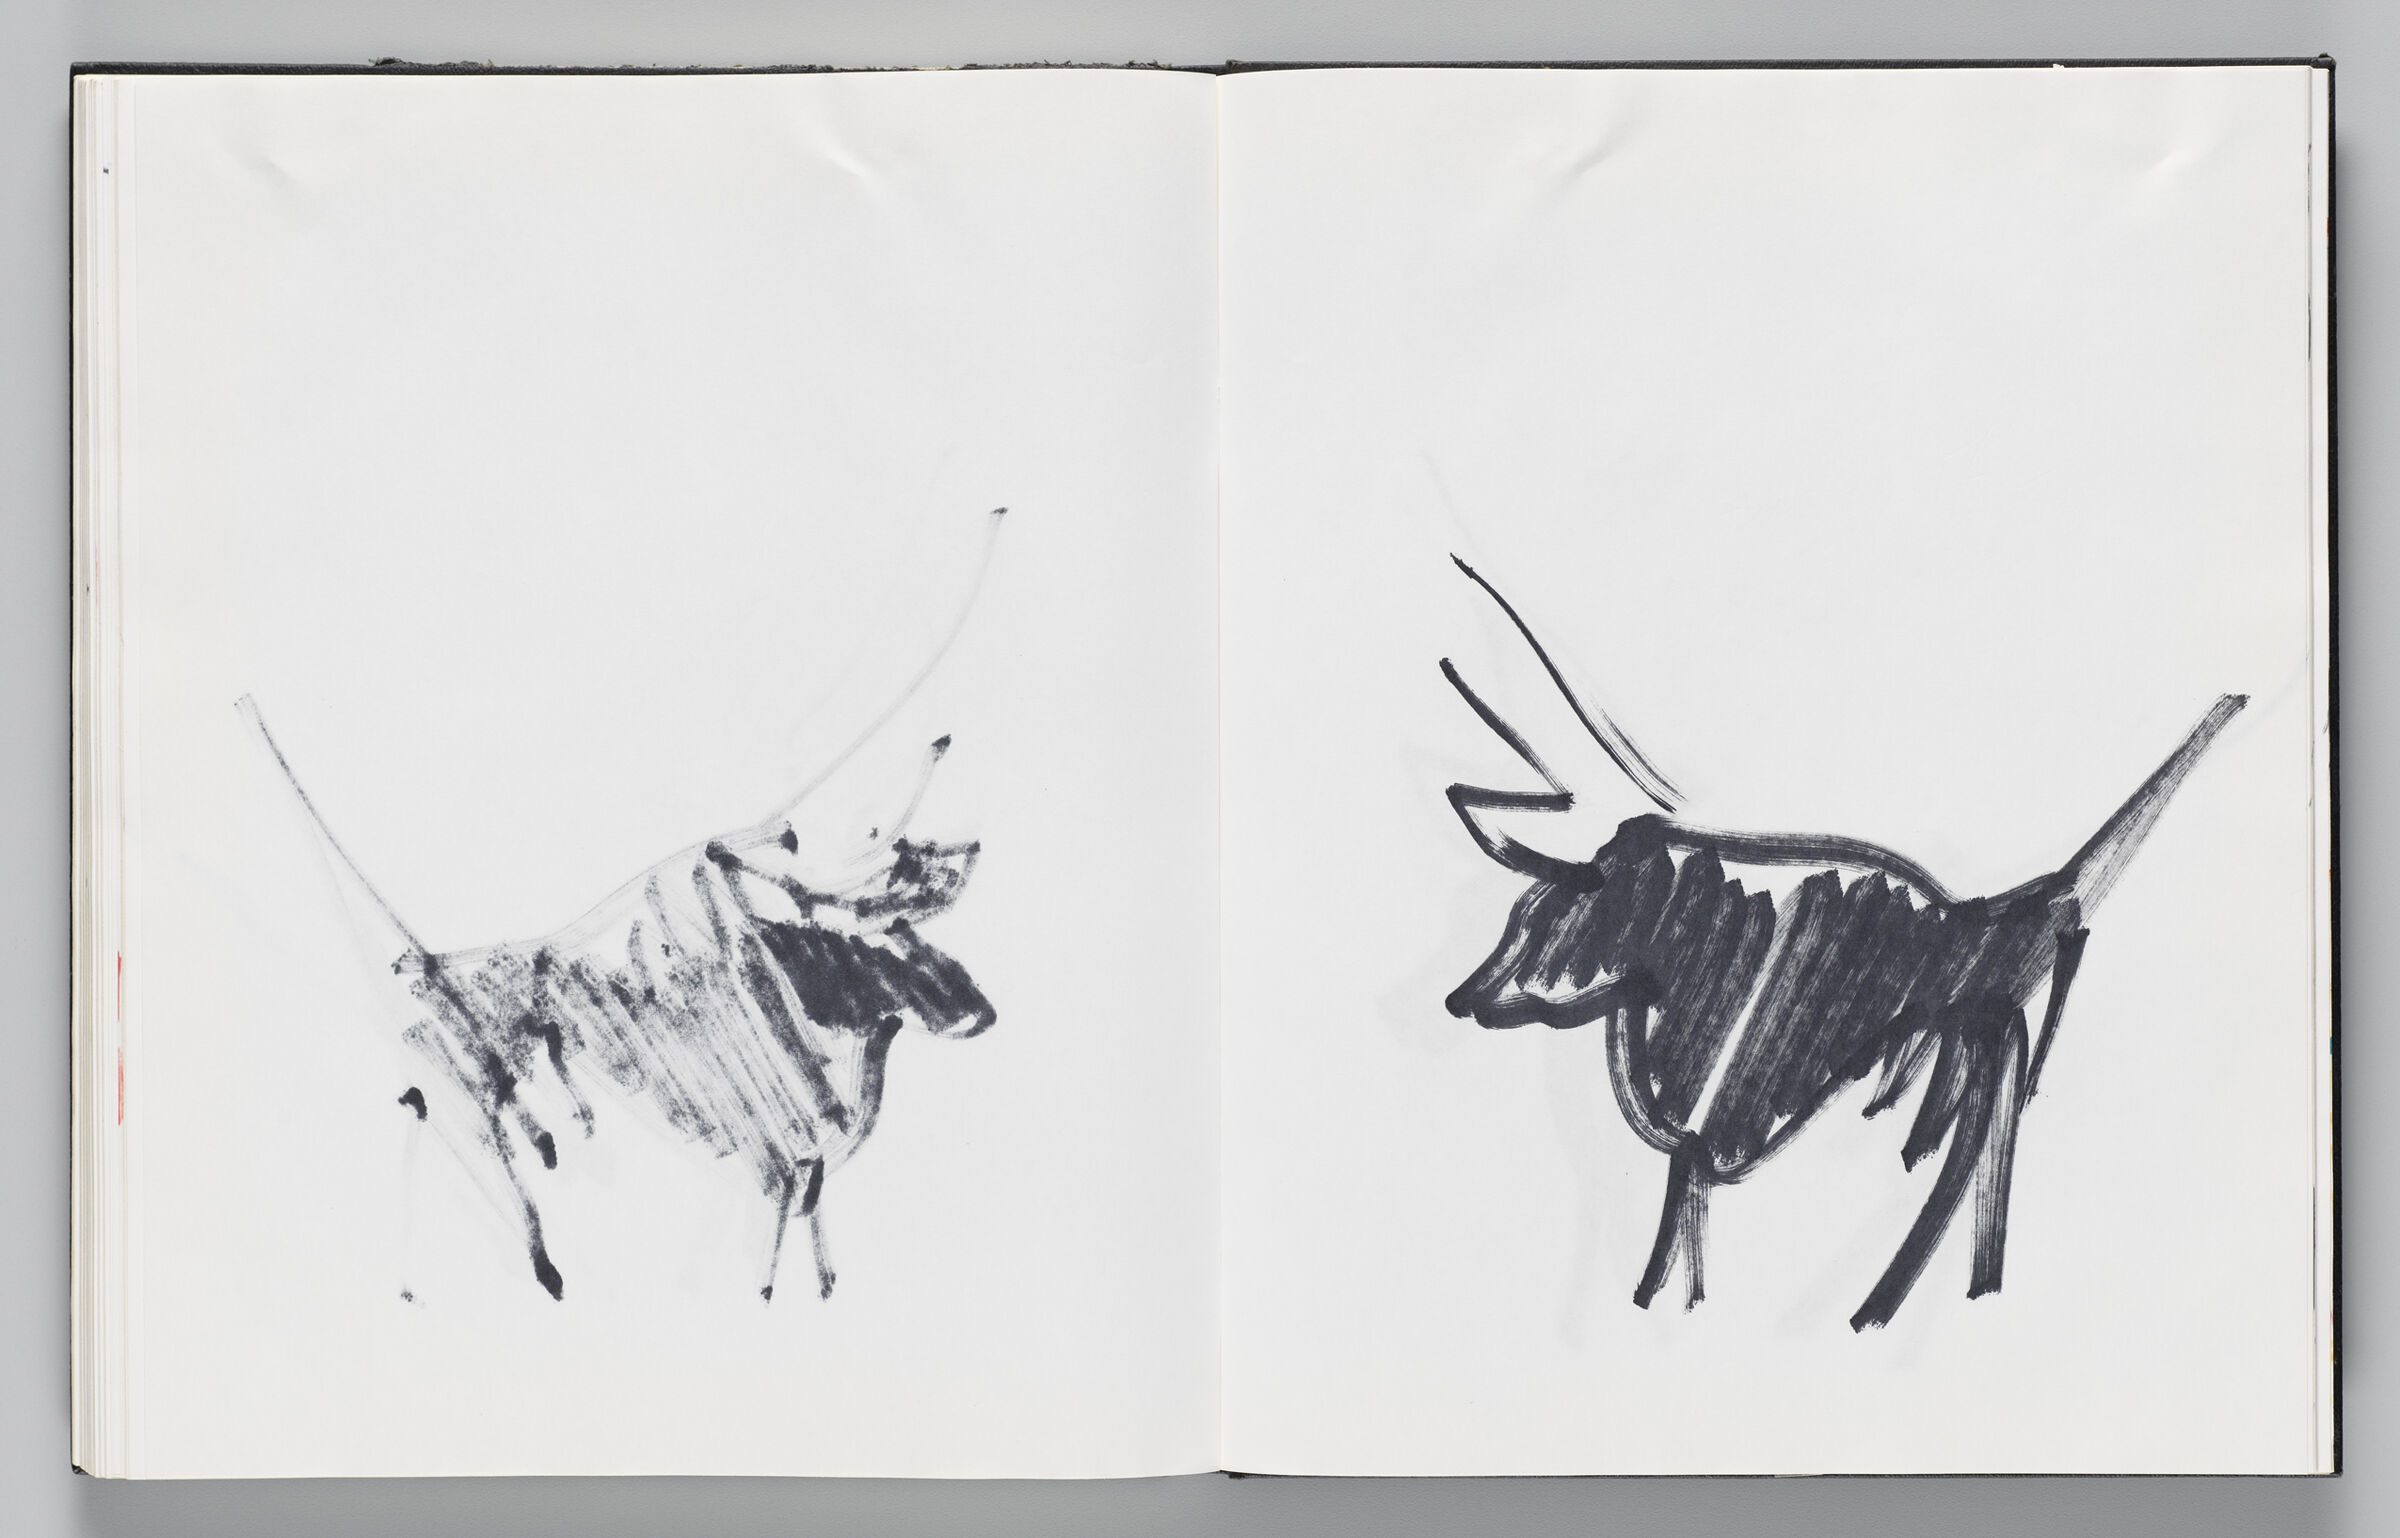 Untitled (Bleed-Through Of Previous Page, Left Page); Untitled (Minatour In Profile, Right Page)